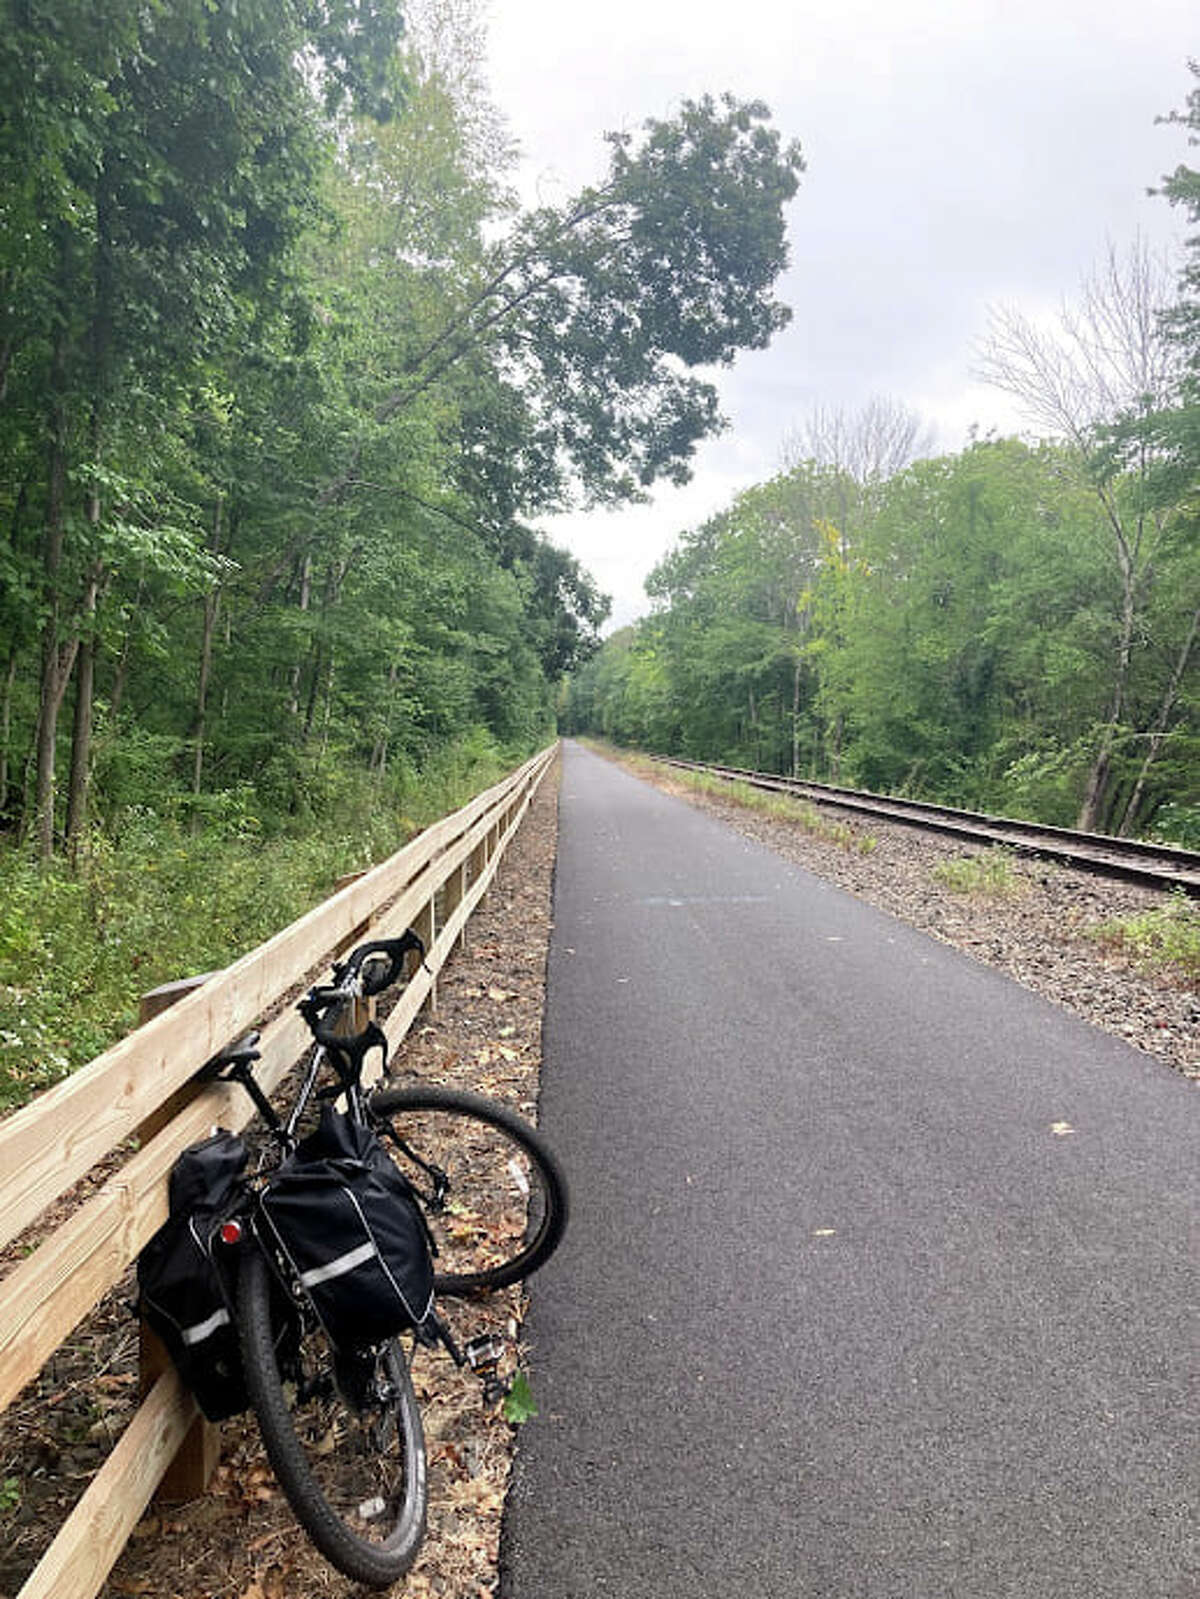 The Empire State Trail is popular with long-distance cyclists, but some are scrambling to rebook travel plans when Amtrak discontinued bike service on many trains.